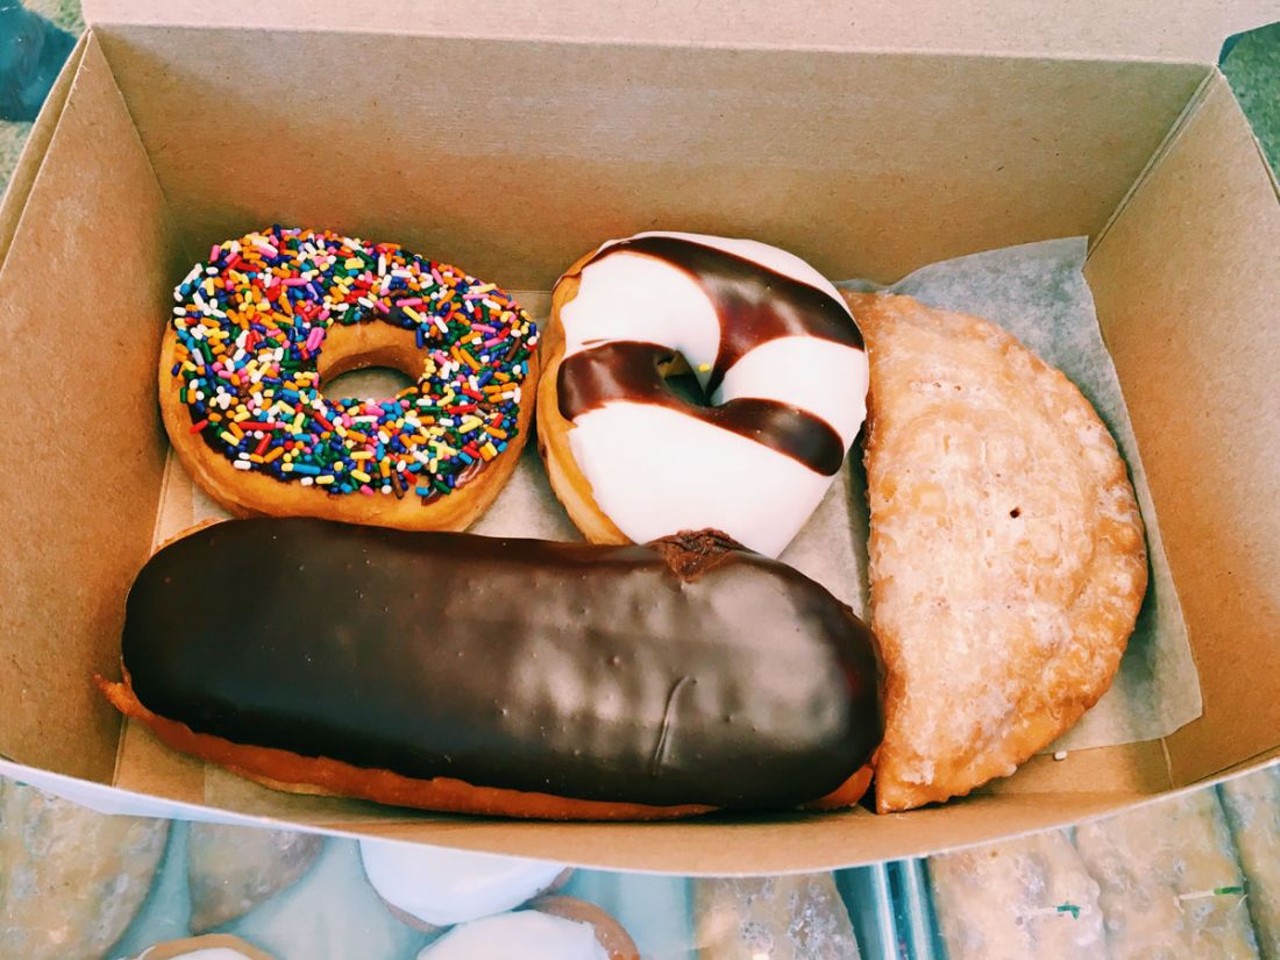 Spend a day visiting St. Louis' many donut shops.
Priorities.
Photo by Brittani Schlager.